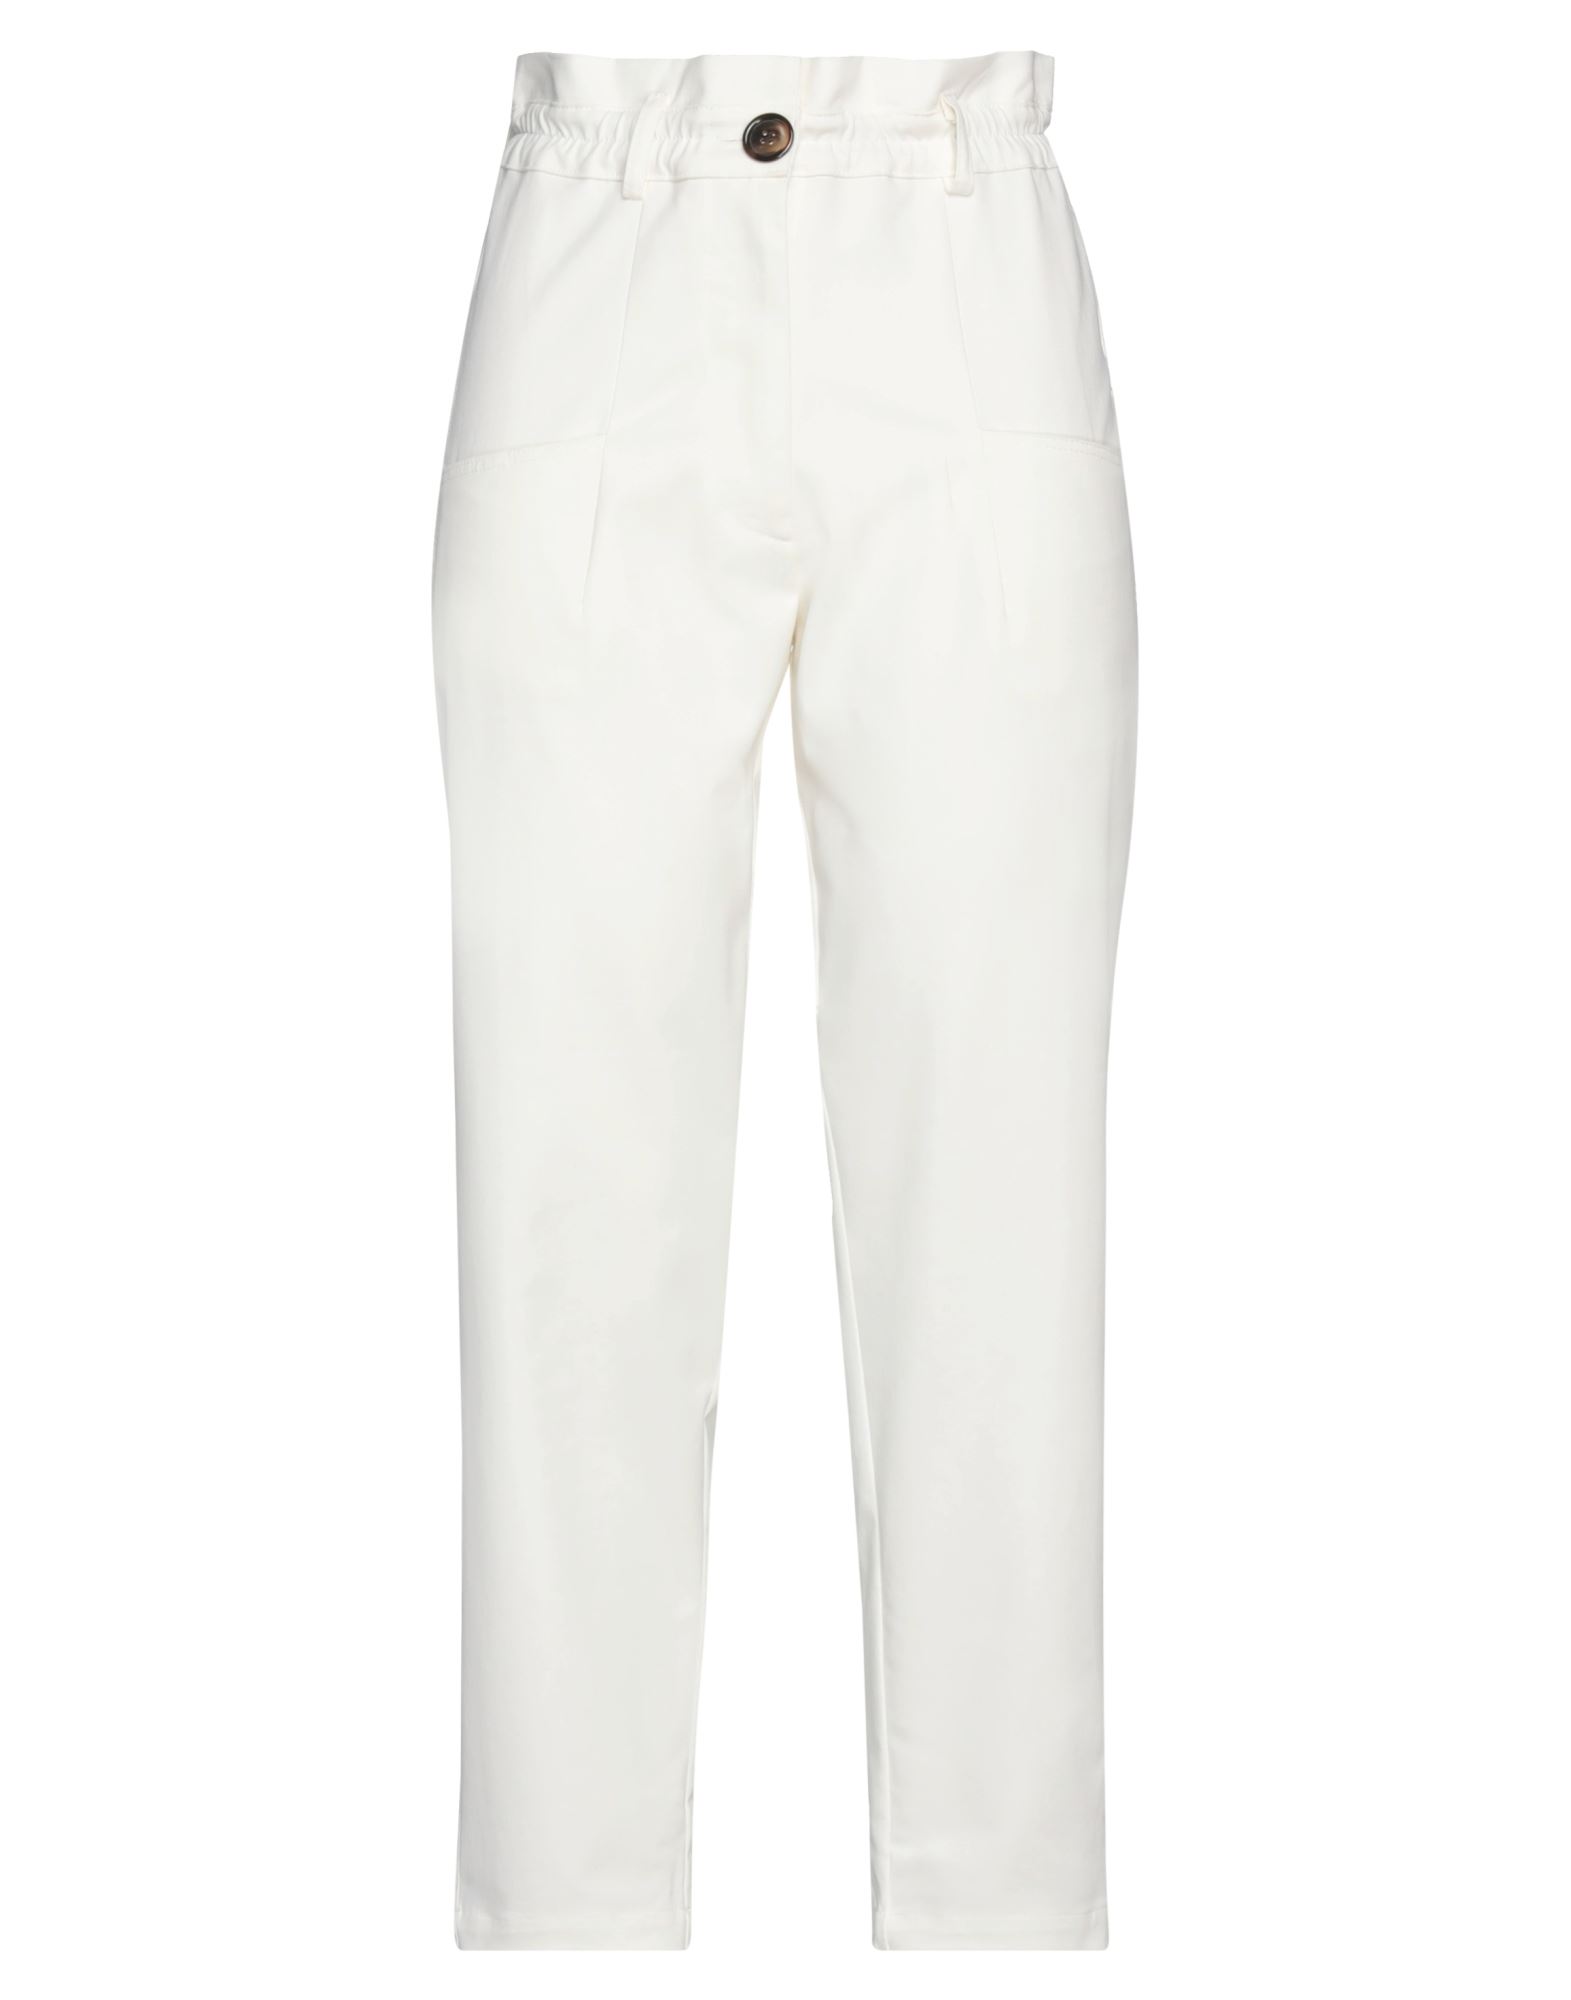 Collectors Club Pants In White